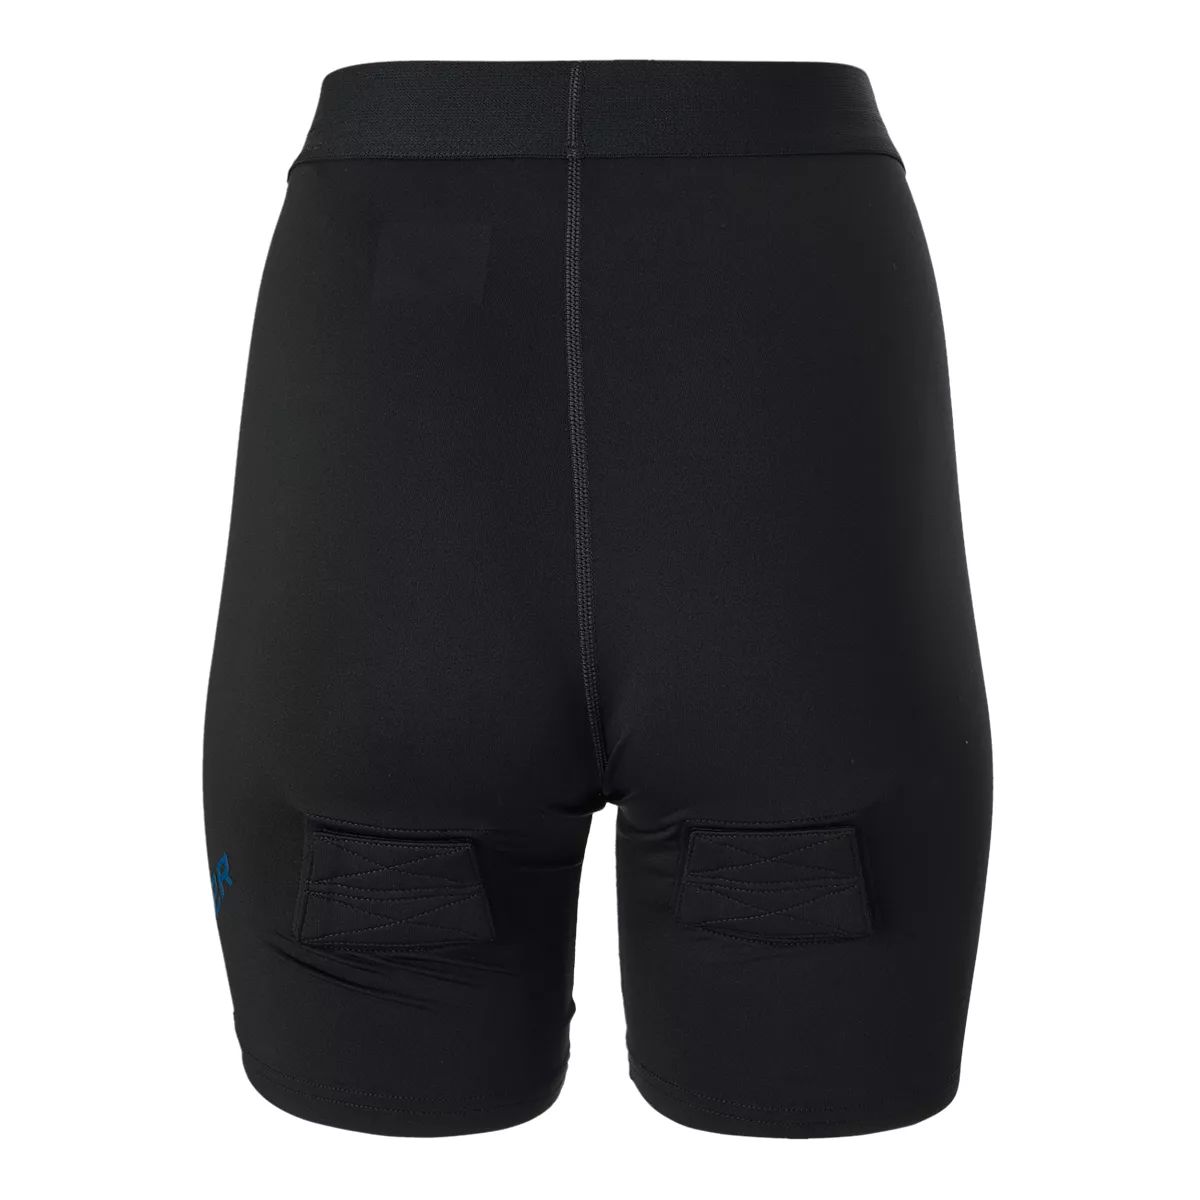 Women's Cookies 3 Compression Shorts